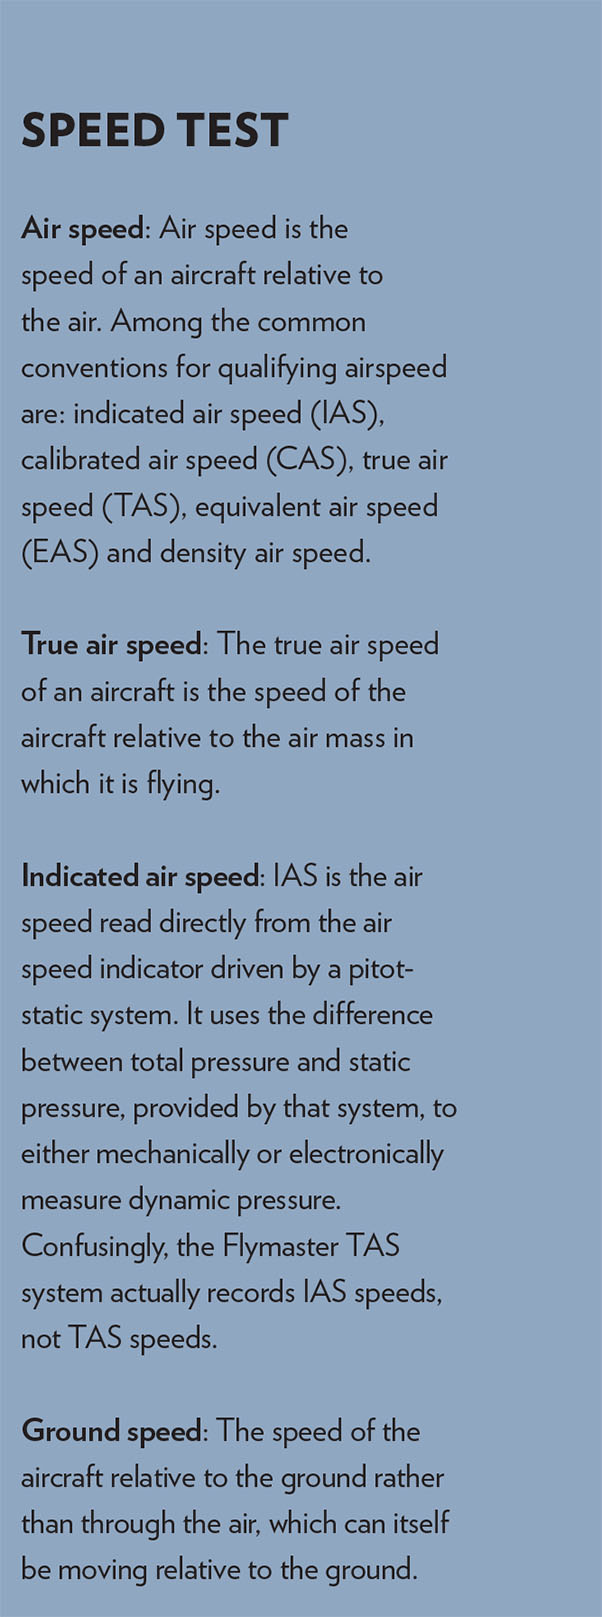 airspeed-definitions